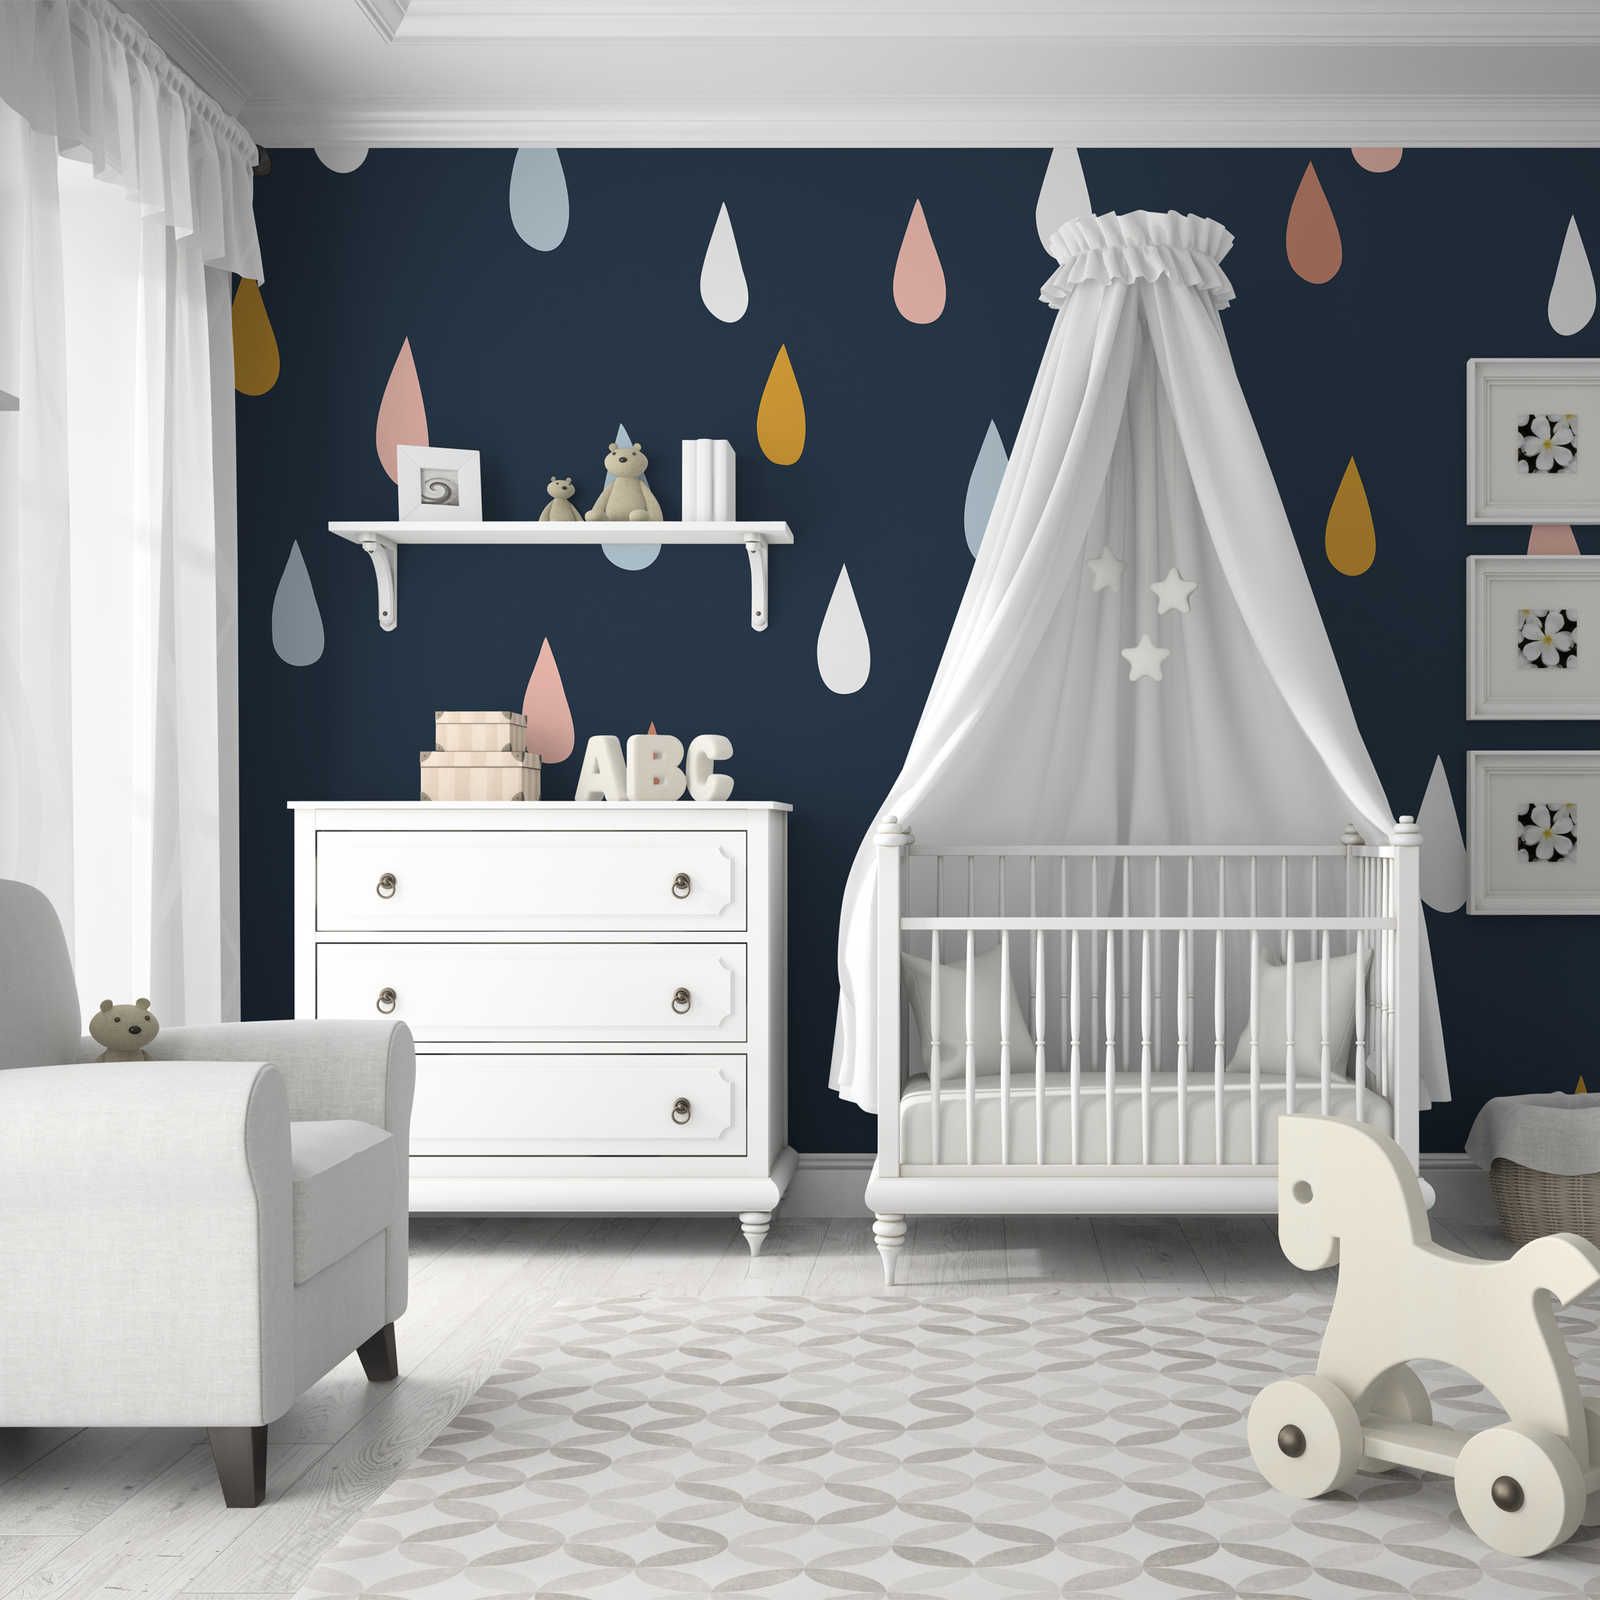 Children's Room Wallpaper with Colourful Drops - Textured non-woven
